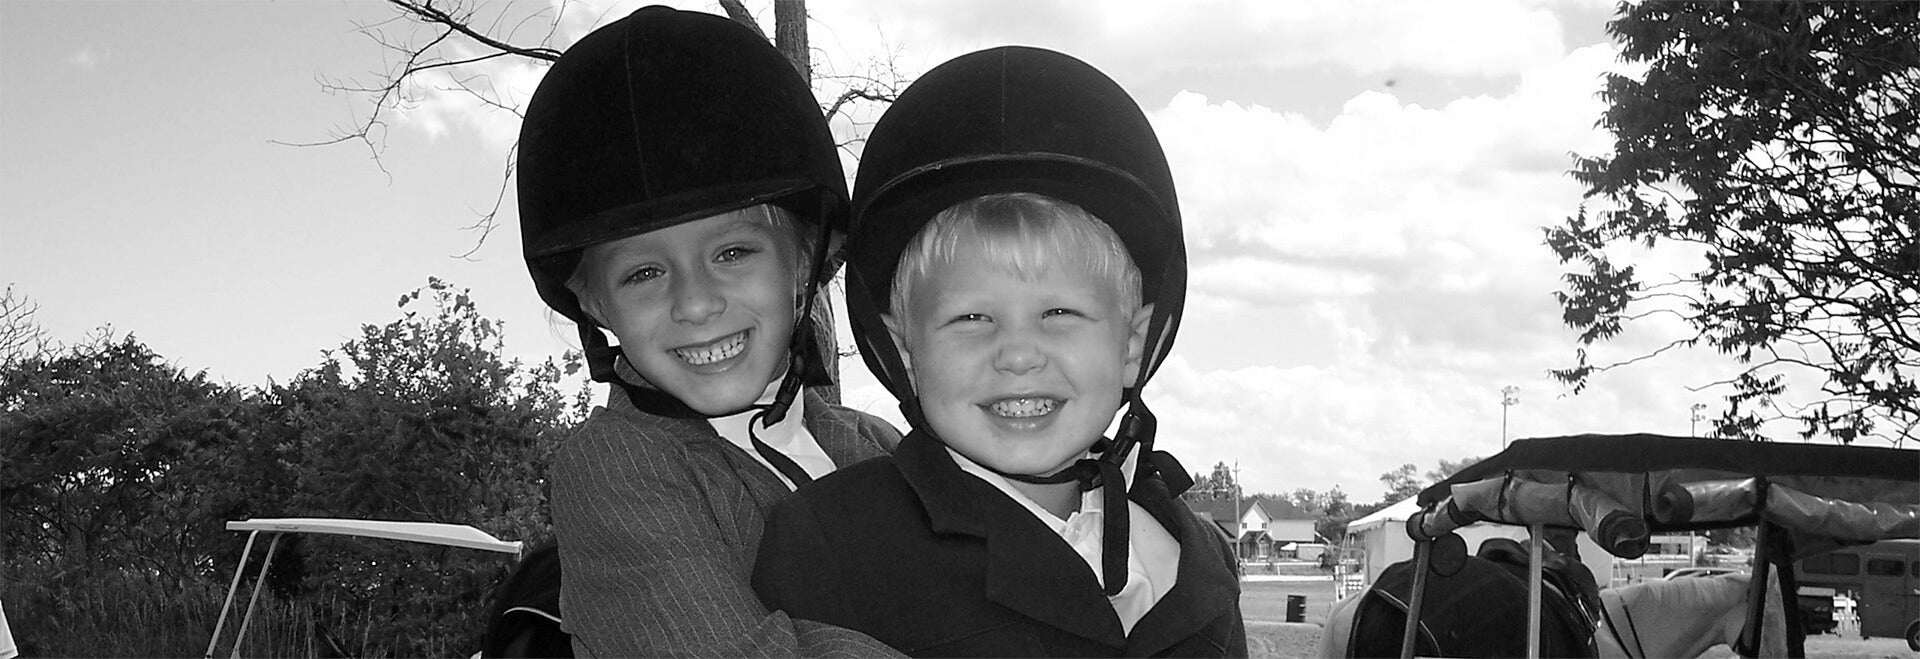 Two children smiling while sitting on a horse